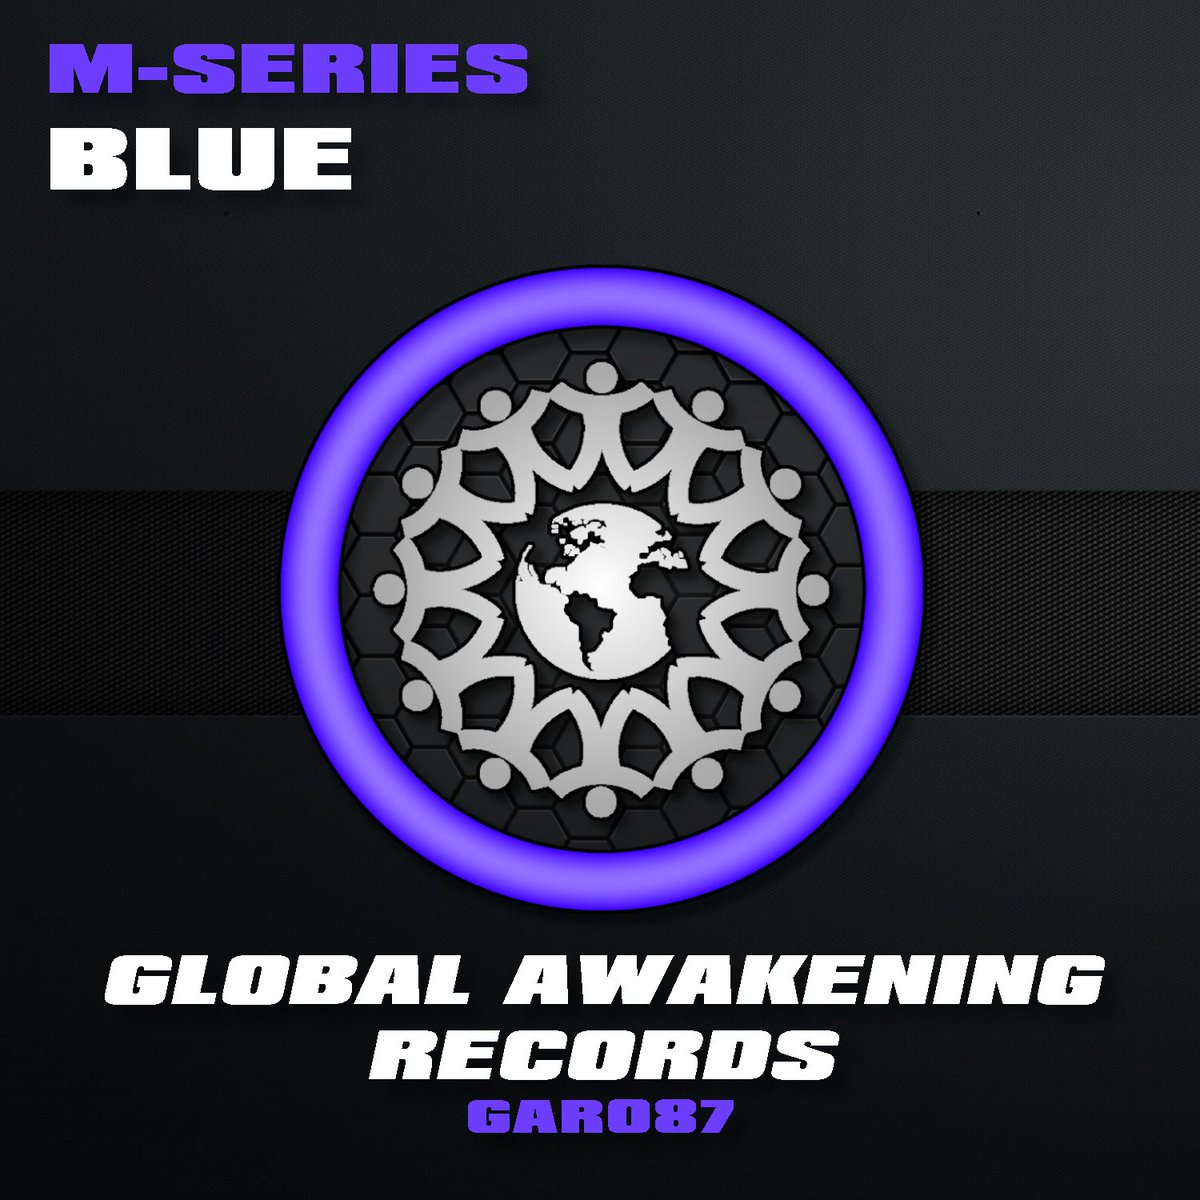 The latest Global Awakening Records release 'Blue' from M-Series is out now.

Check it out here along with the label's other releases:
bit.ly/blueglobalawak…

#hardhouse #harddance #toolboxdigital #newrelease #newmusic #globalawakeningrecords